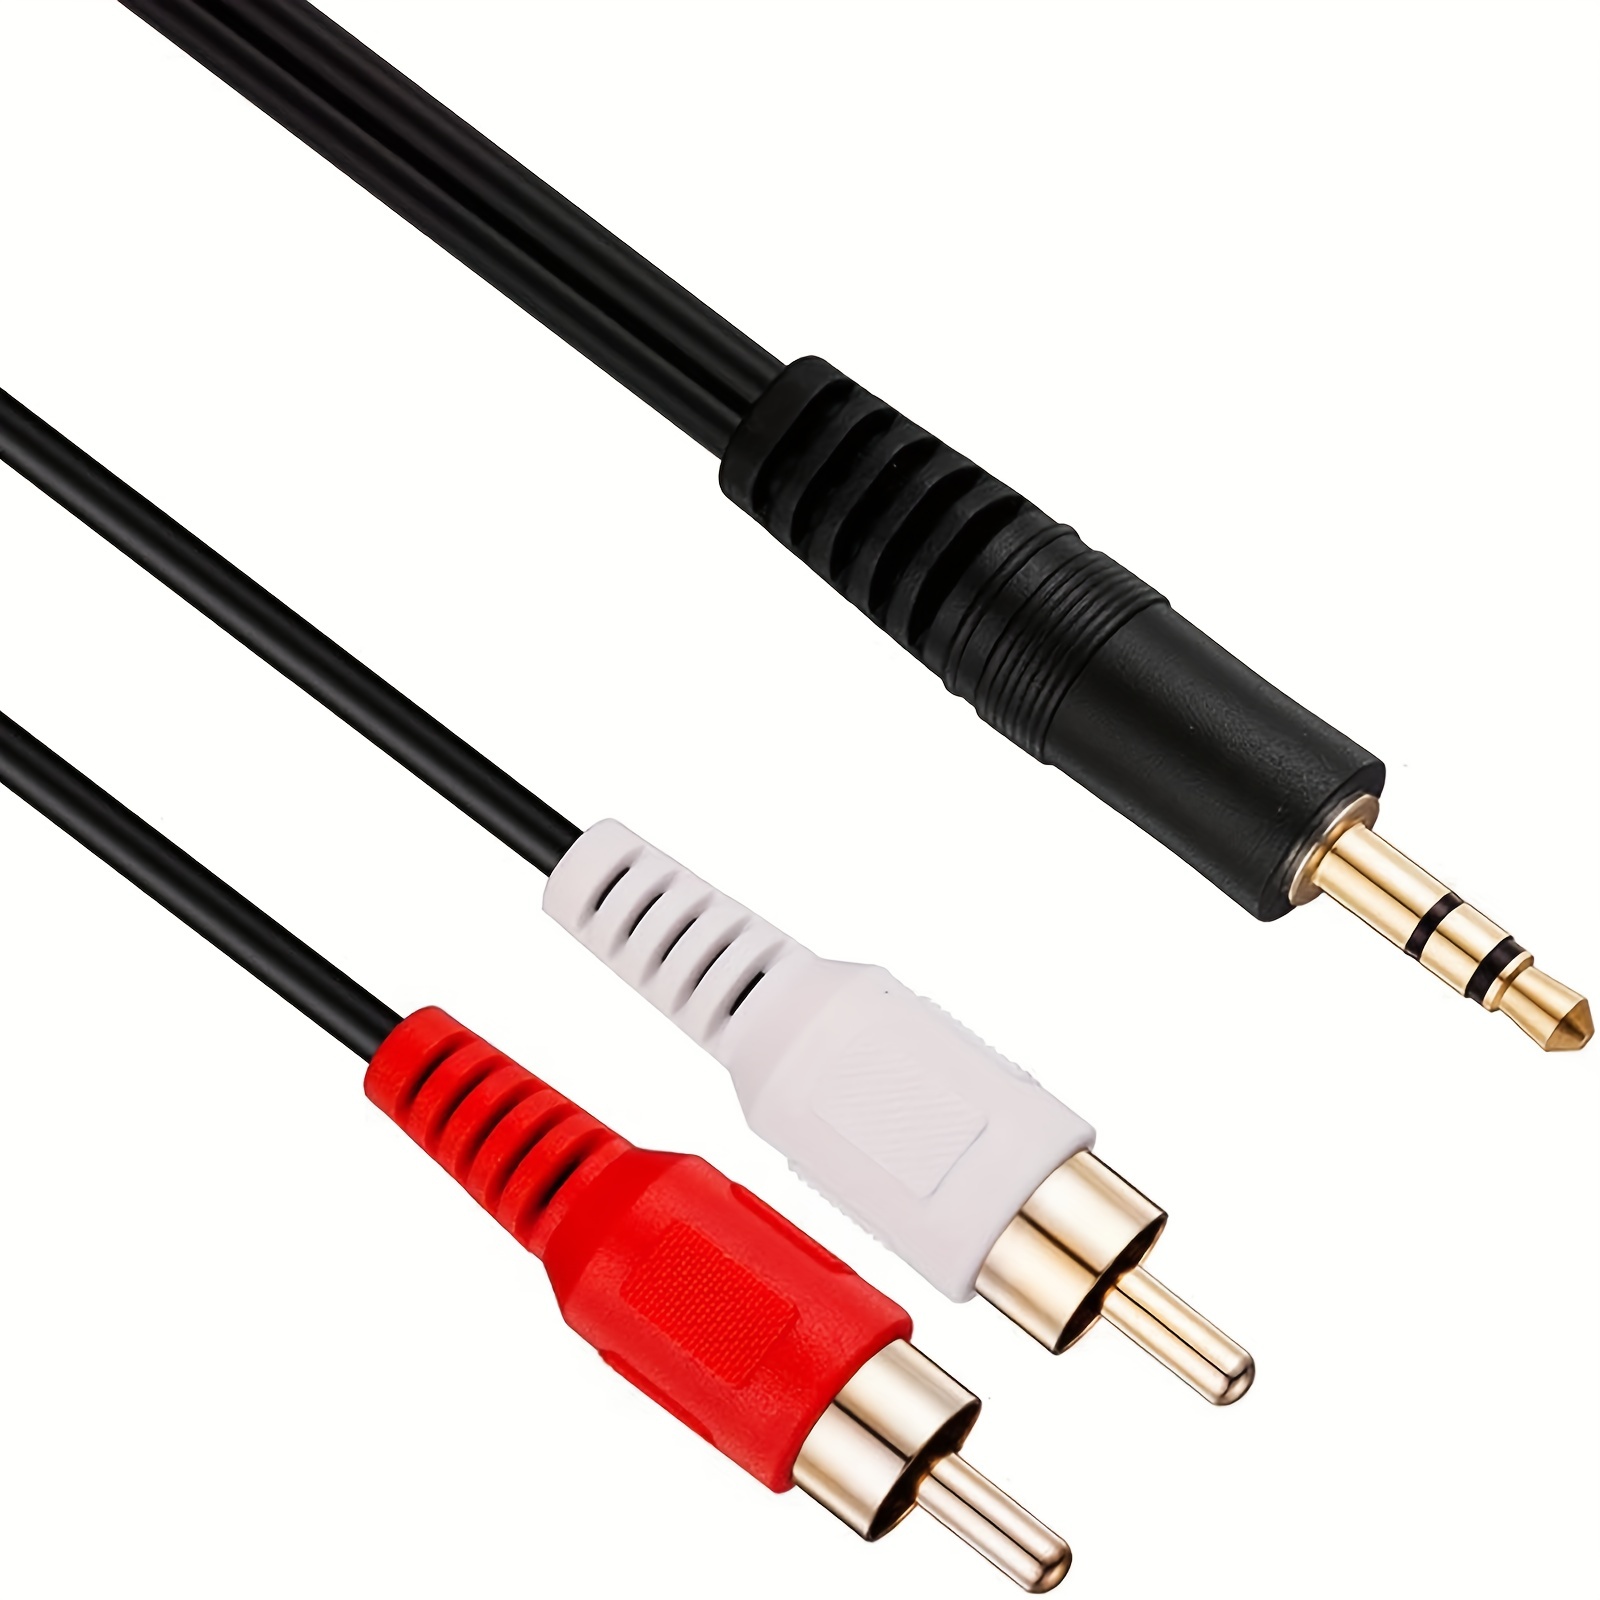 10ft 3.5mm to 3 RCA Video Audio Cable Analog Male Jack TV Box STB Camcorder  Wire